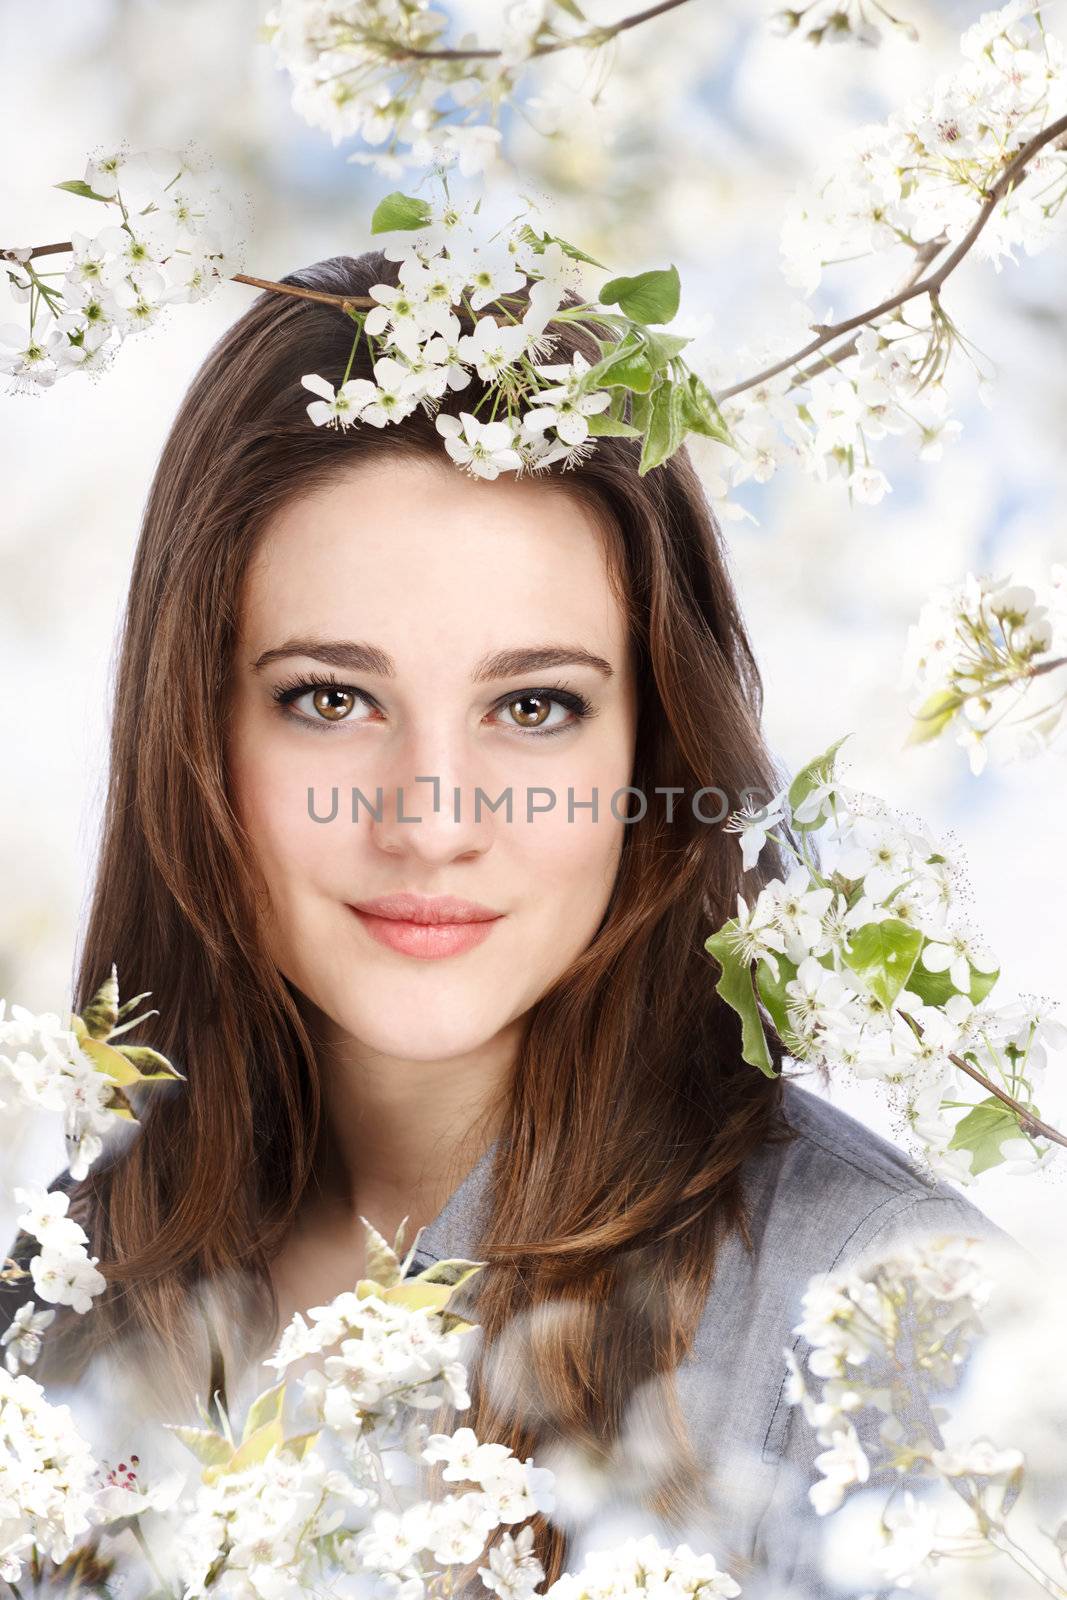 Portrait of a Beautiful Girl with a Blooming Tree